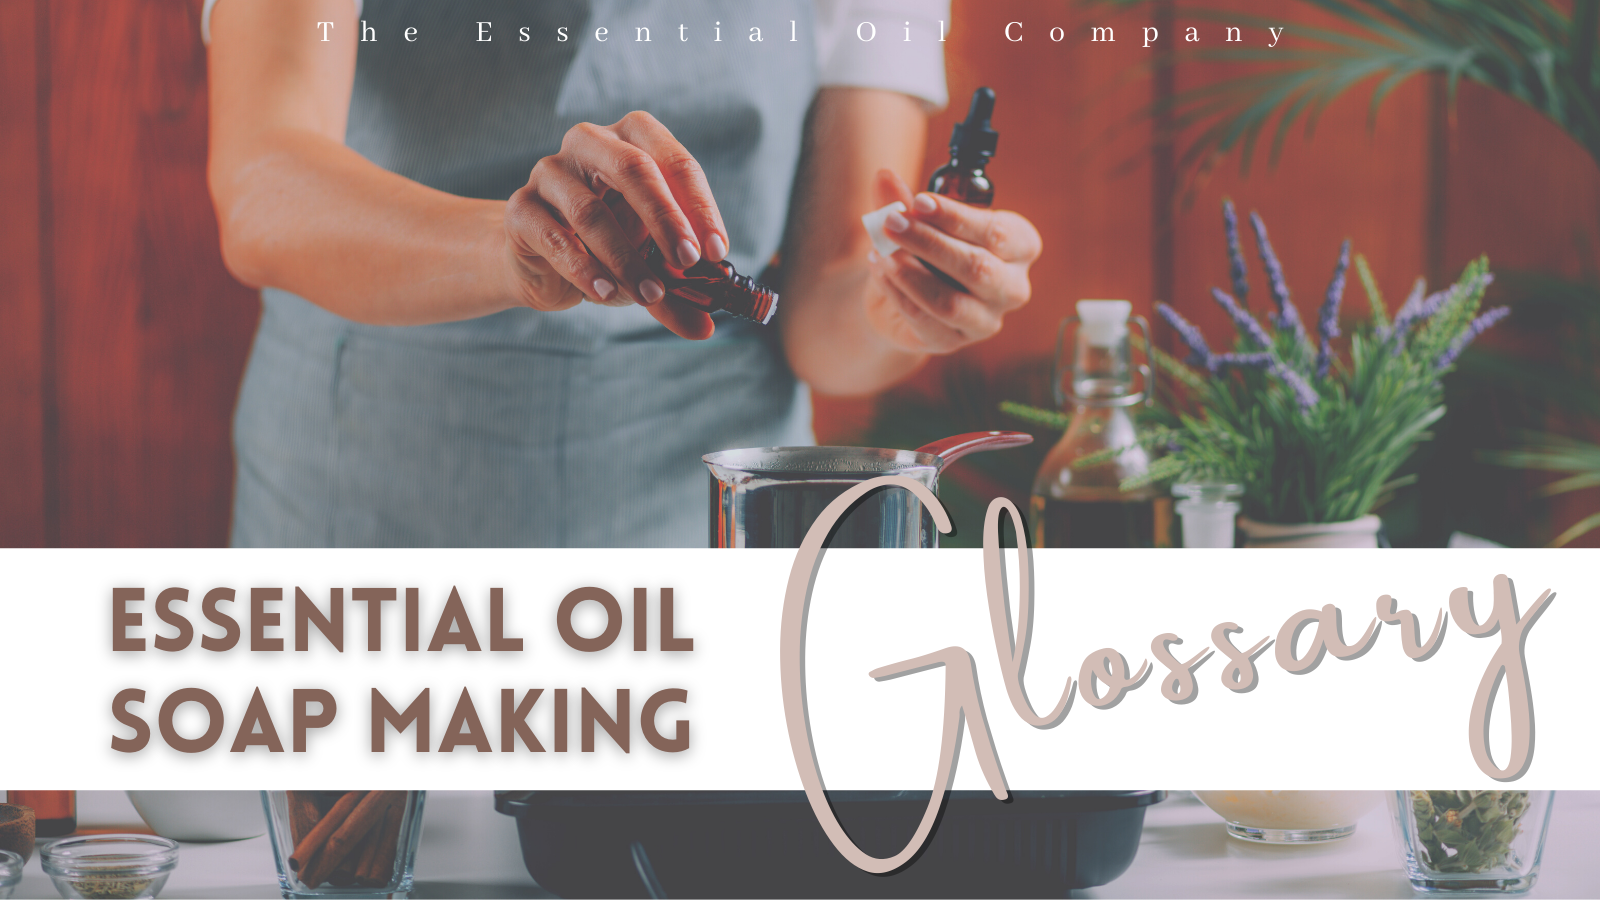 essential oil soap making. making soap with essential oils, soapmaking with essential oils.